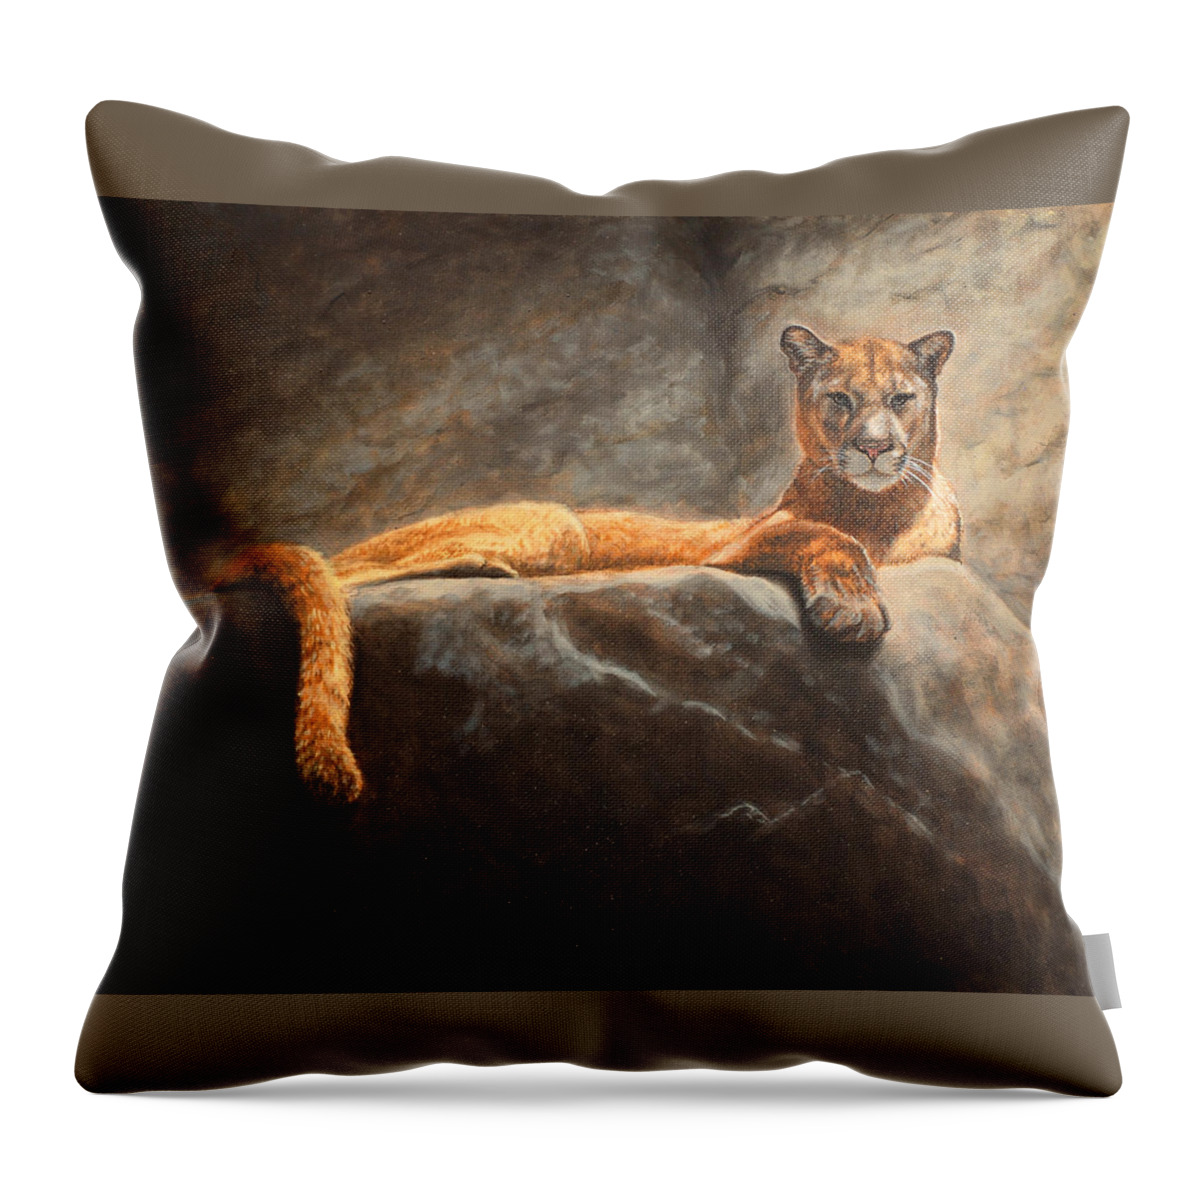 Cougar Throw Pillow featuring the painting Laying Cougar by Linda Merchant